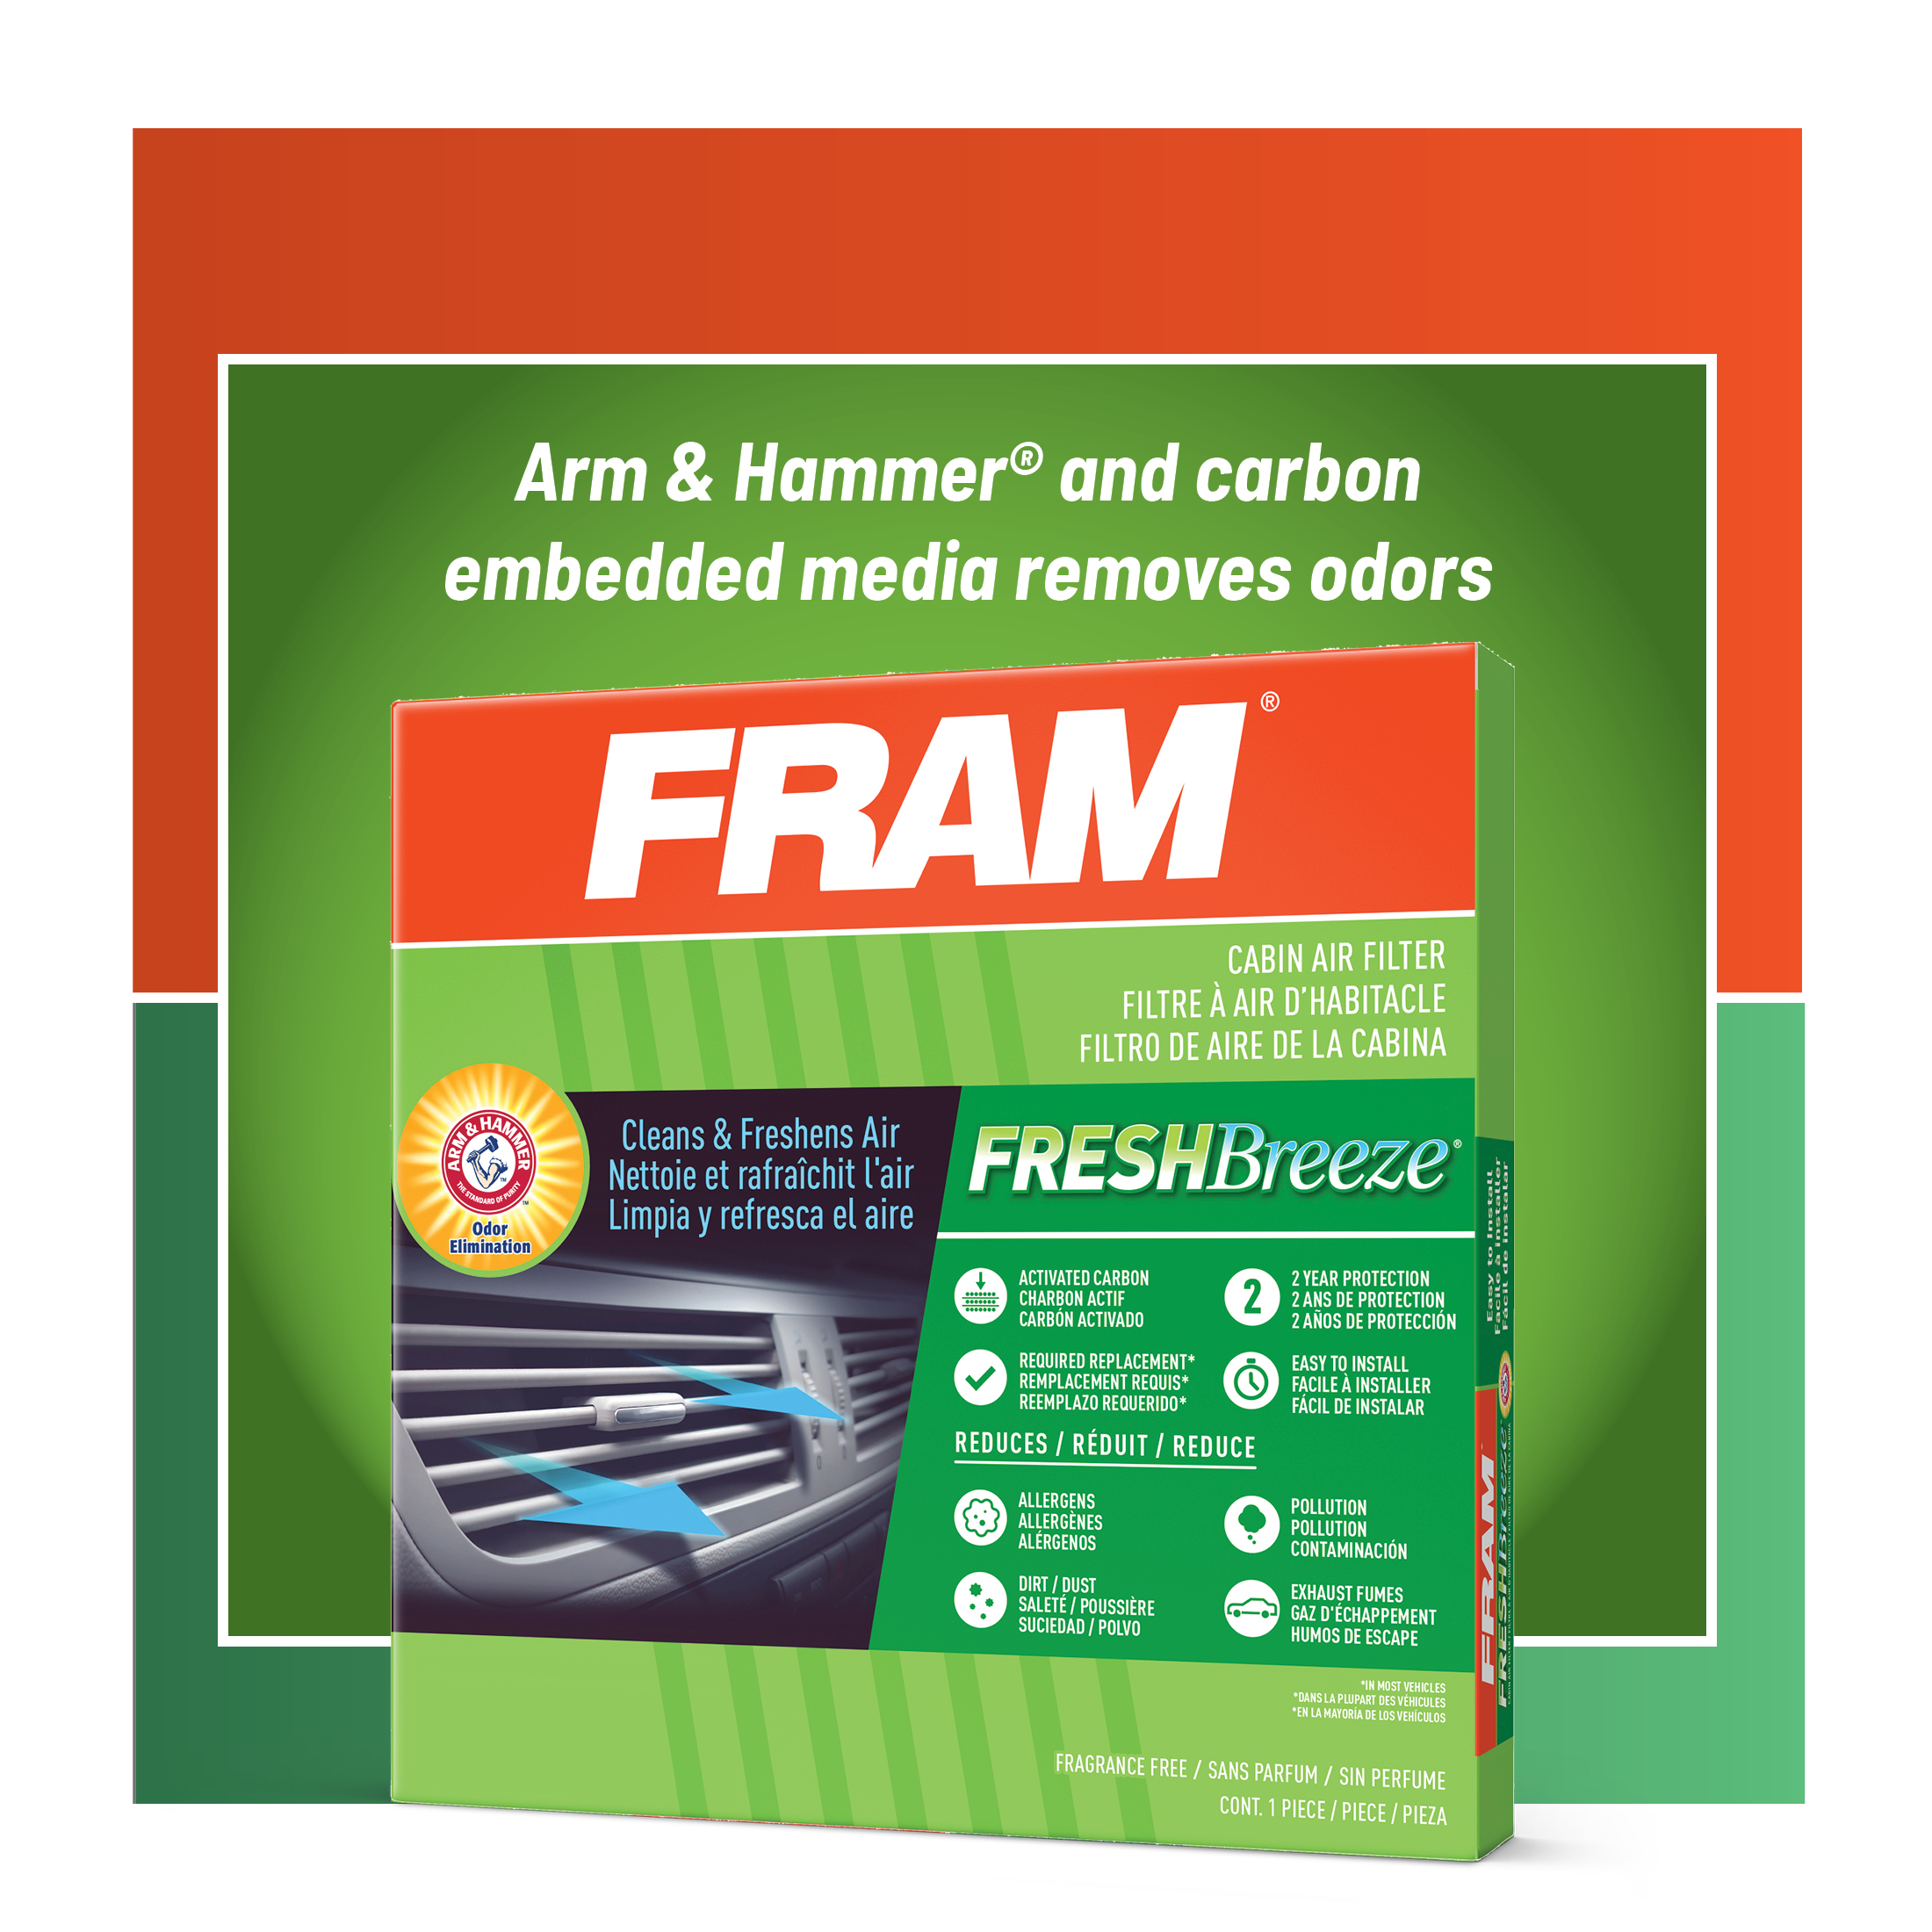 FRAM Fresh Breeze Cabin Air Filter CF10896 with Arm & Hammer Baking Soda, for Select Hyundai and Kia Vehicles Fits select: 2007-2010 HYUNDAI SONATA, 2011-2012 HYUNDAI SANTA FE - image 1 of 10